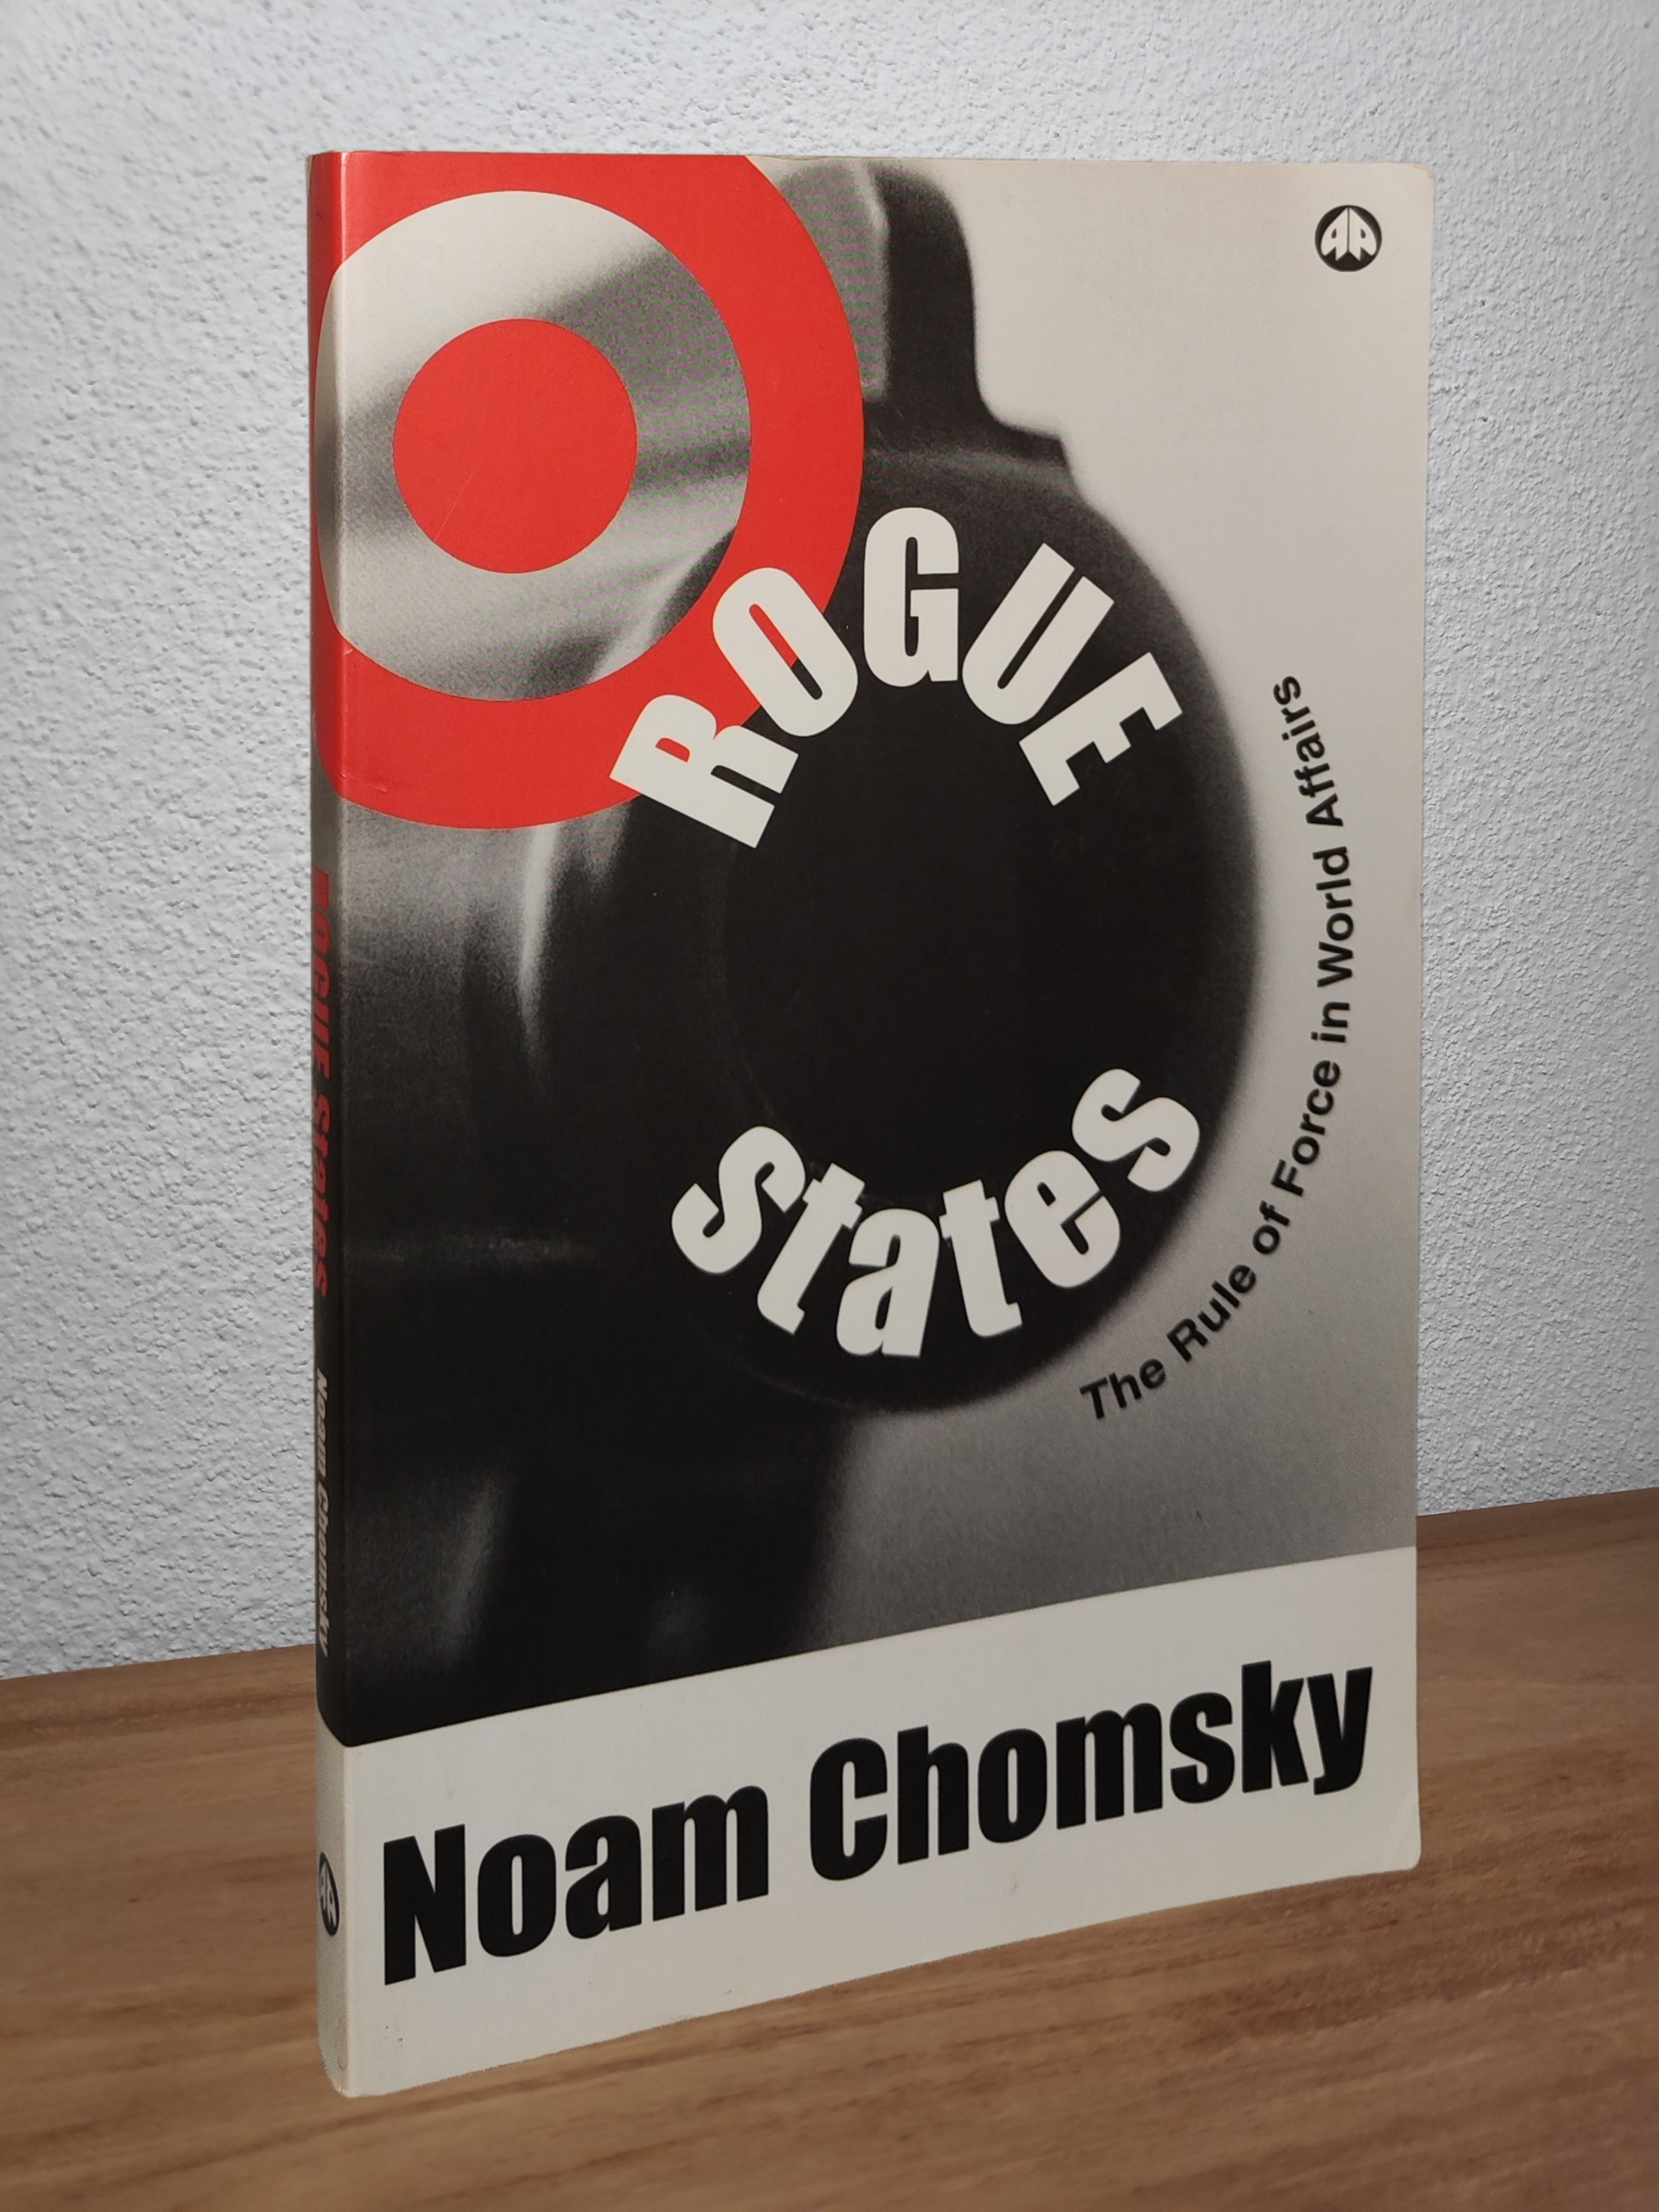 Noam Chomsky - Rogue States  - Second-hand english book to deliver in Zurich & Switzerland